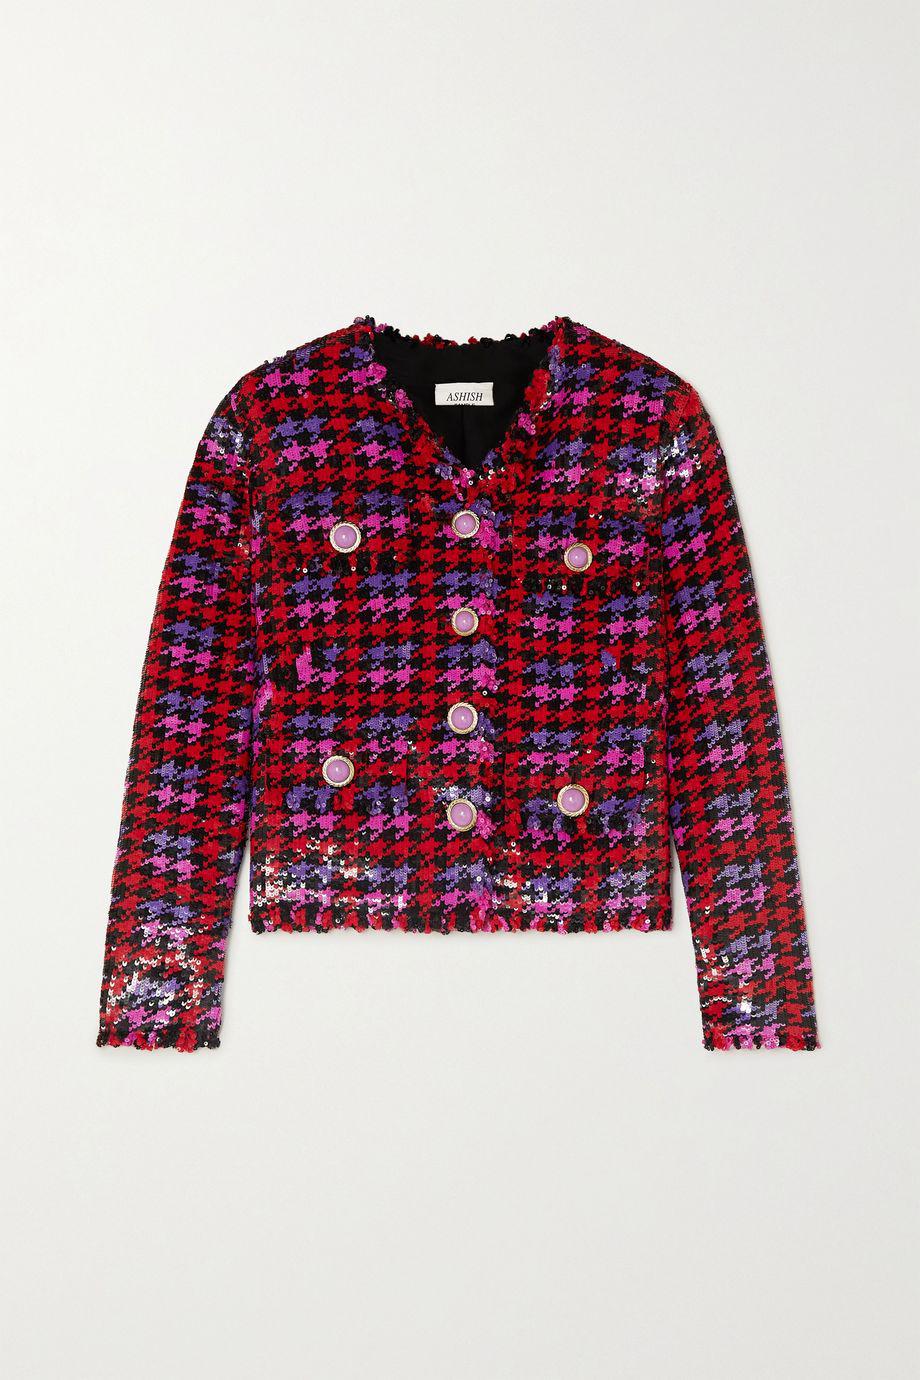 Cropped houndstooth sequined cotton jacket by ASHISH